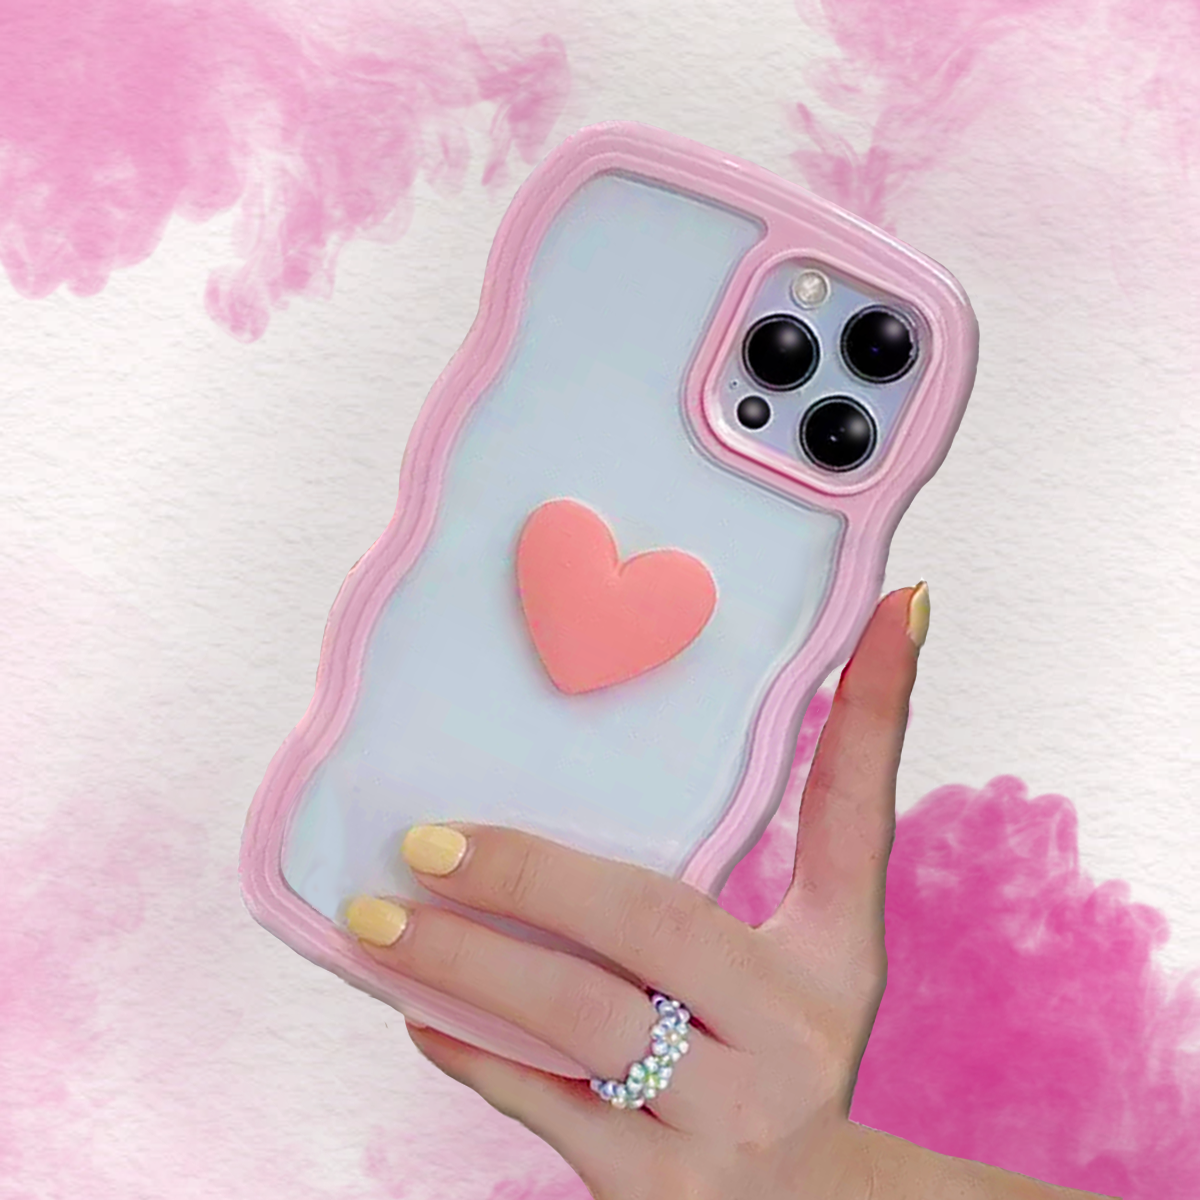 3D LOVE HEART WAVY BORDER CASE FOR IPHONE